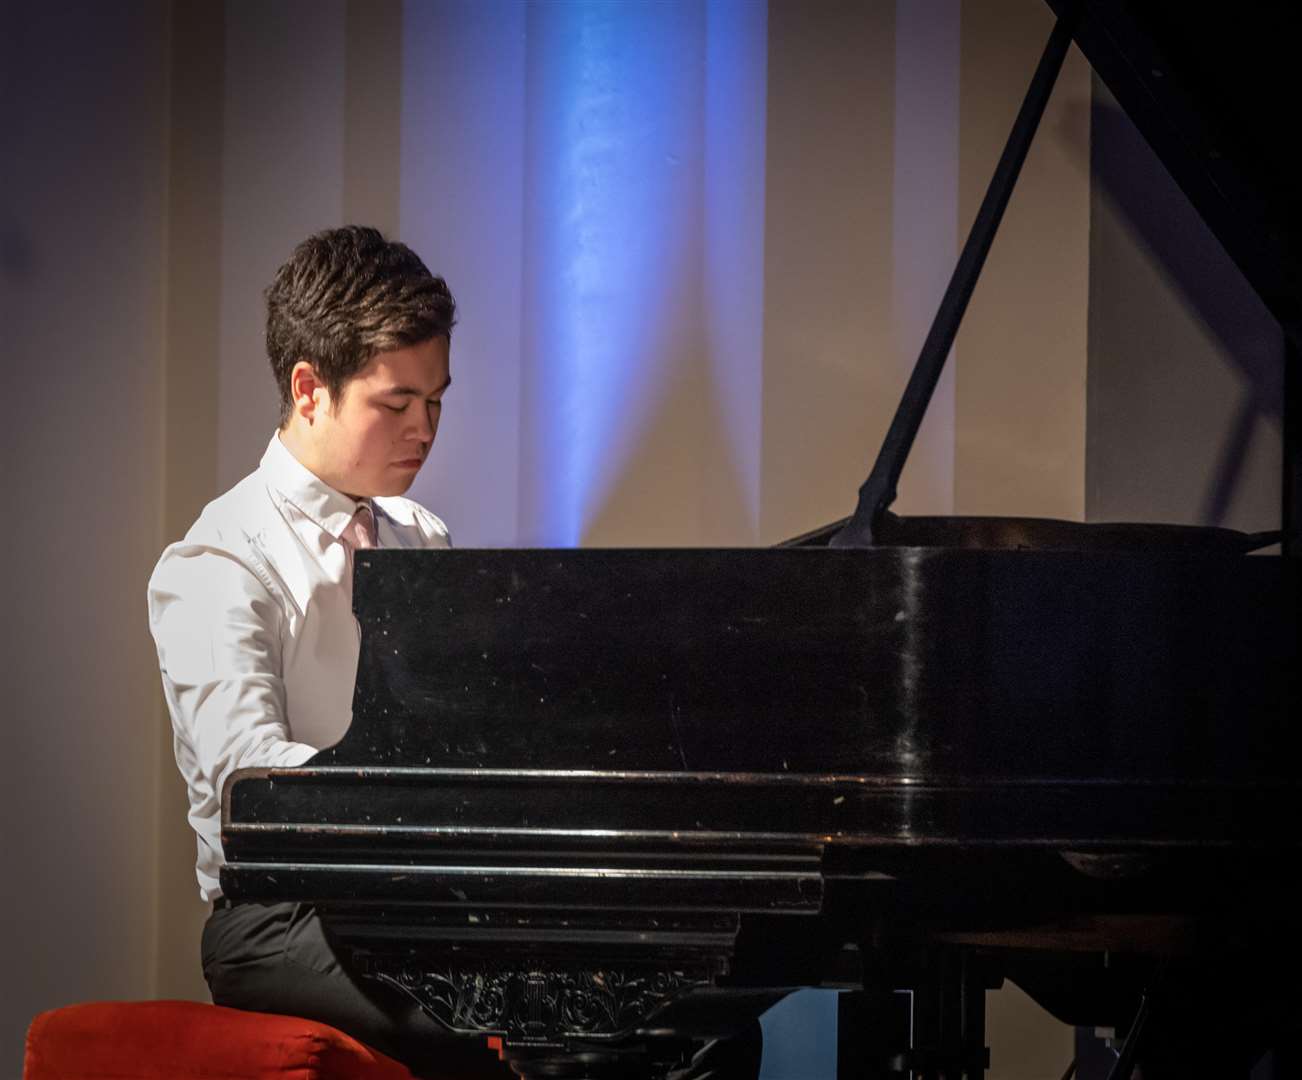 The new Maidstone Musician of the Year, Matthew Hua, in action